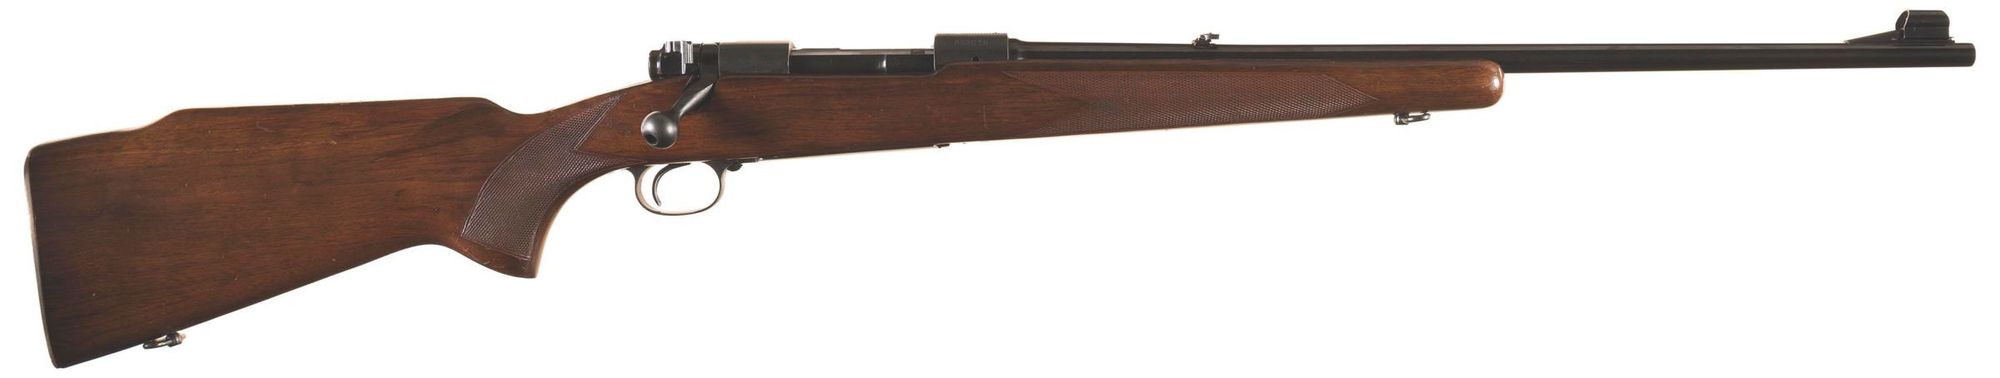 Lot 3086: Pre-64 Winchester Model 70 Featherweight Bolt Action Rifle